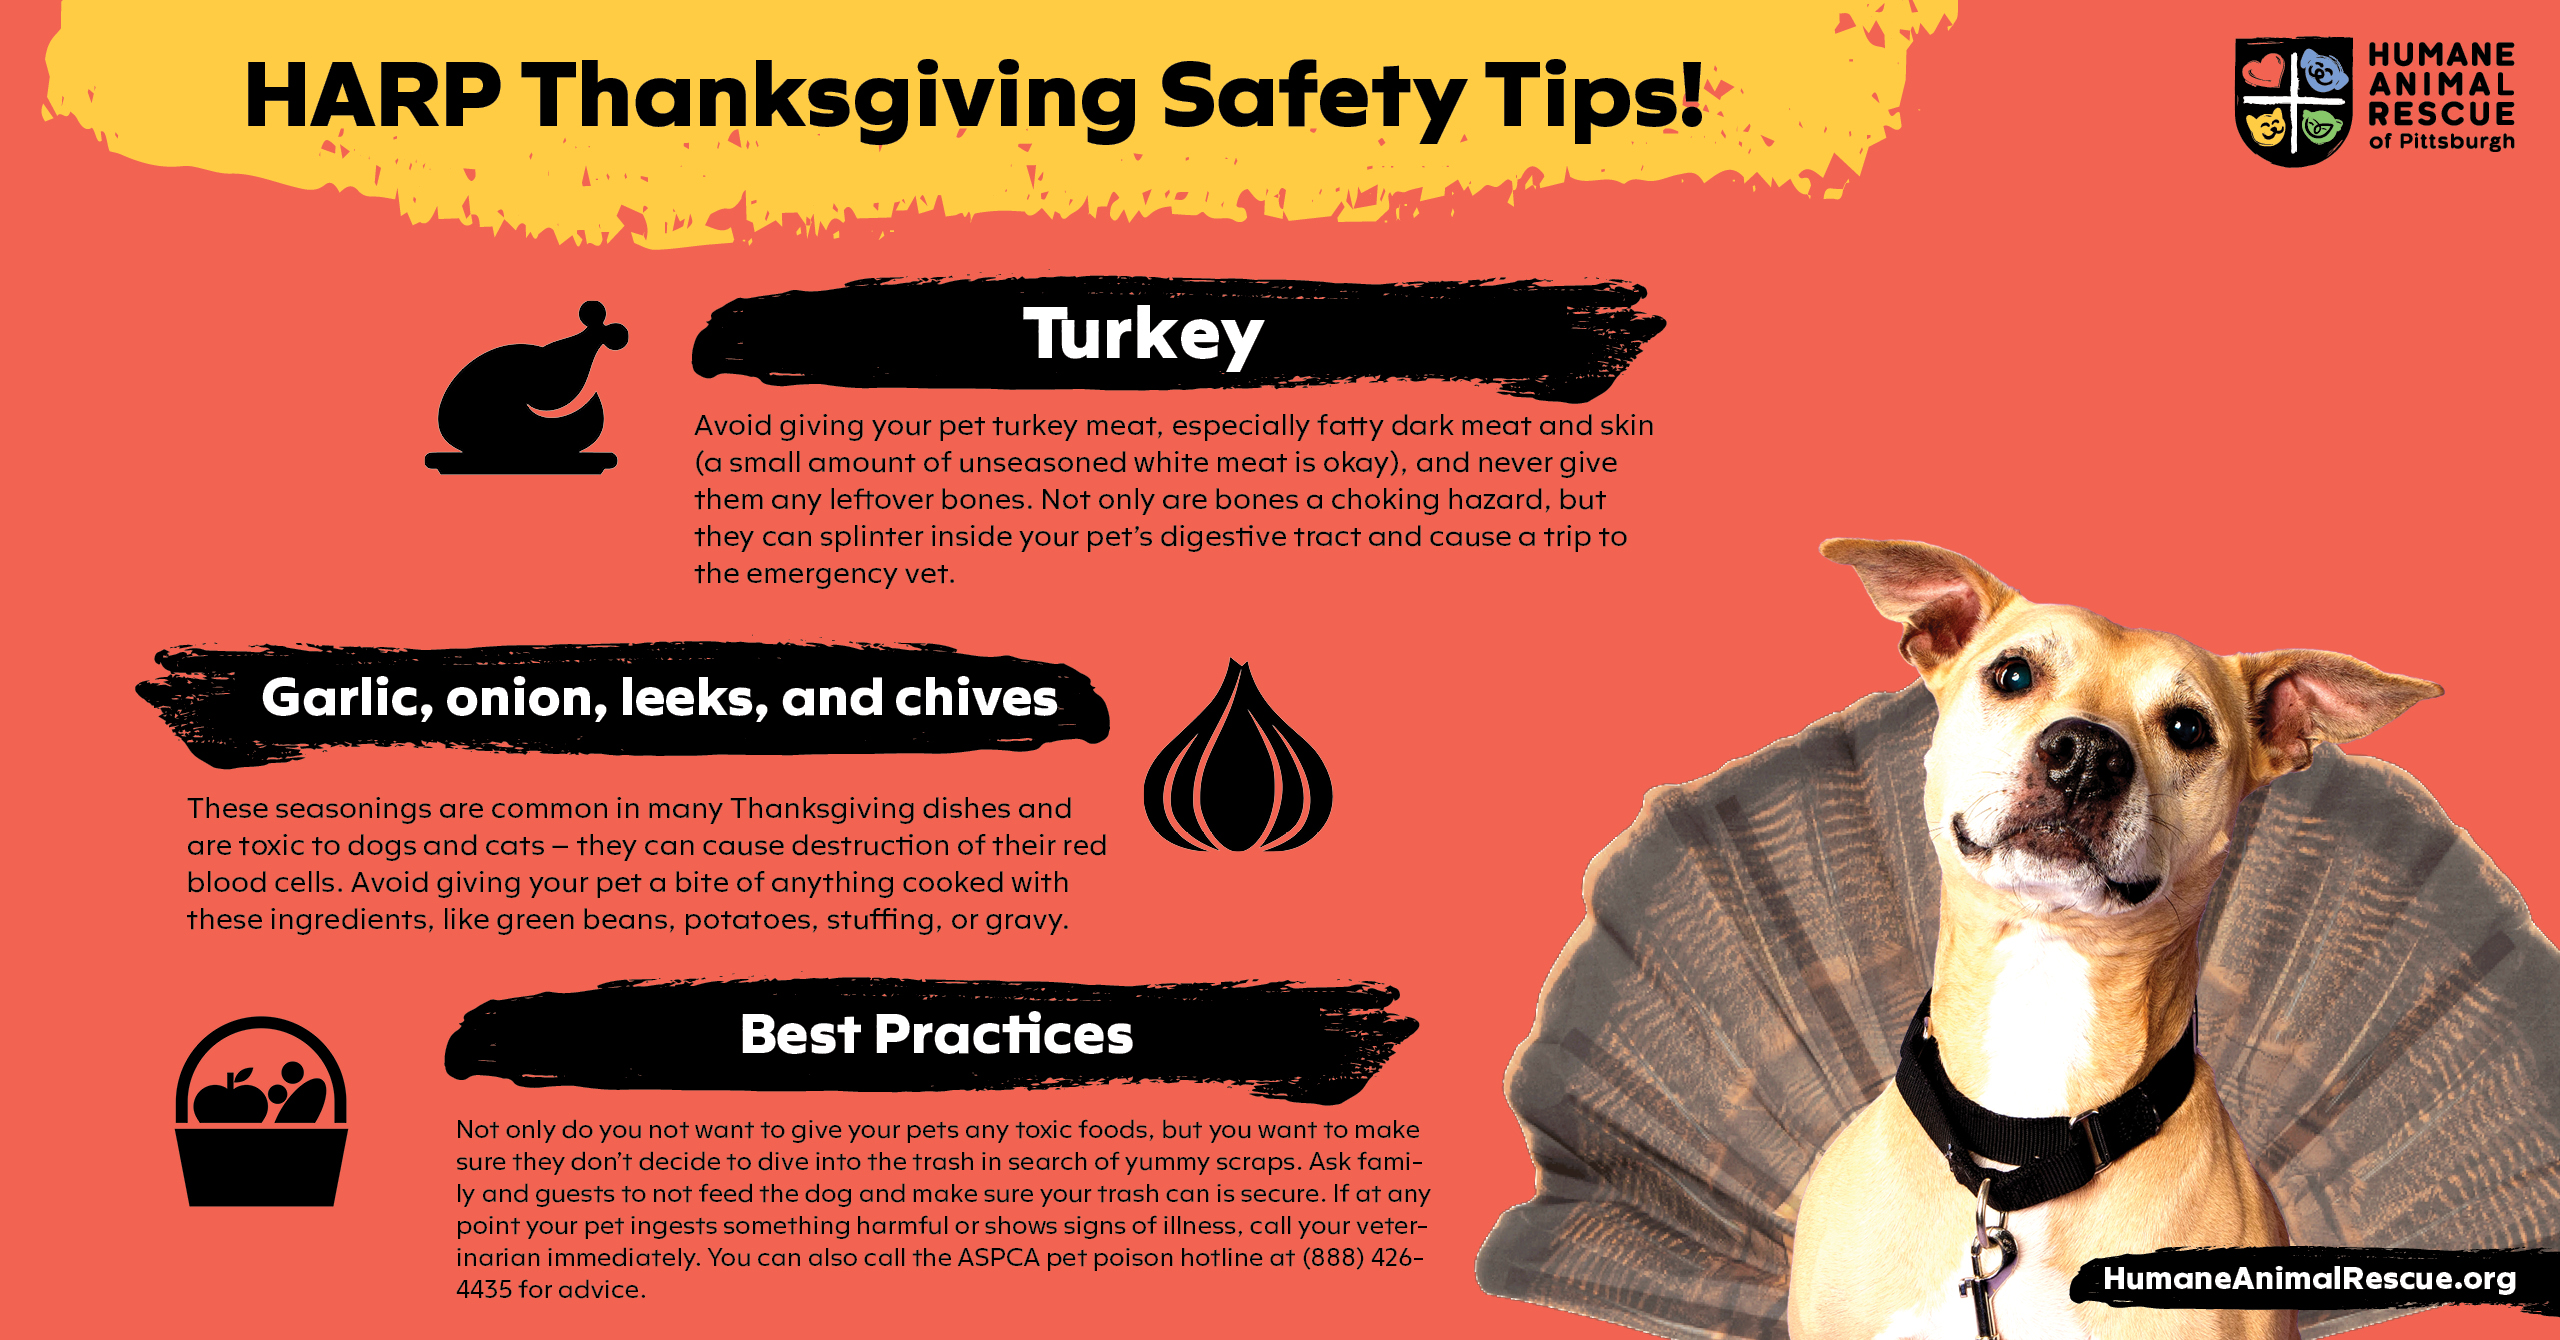 Tips For Keeping Your Pets Safe This Thanksgiving - Humane Animal Rescue